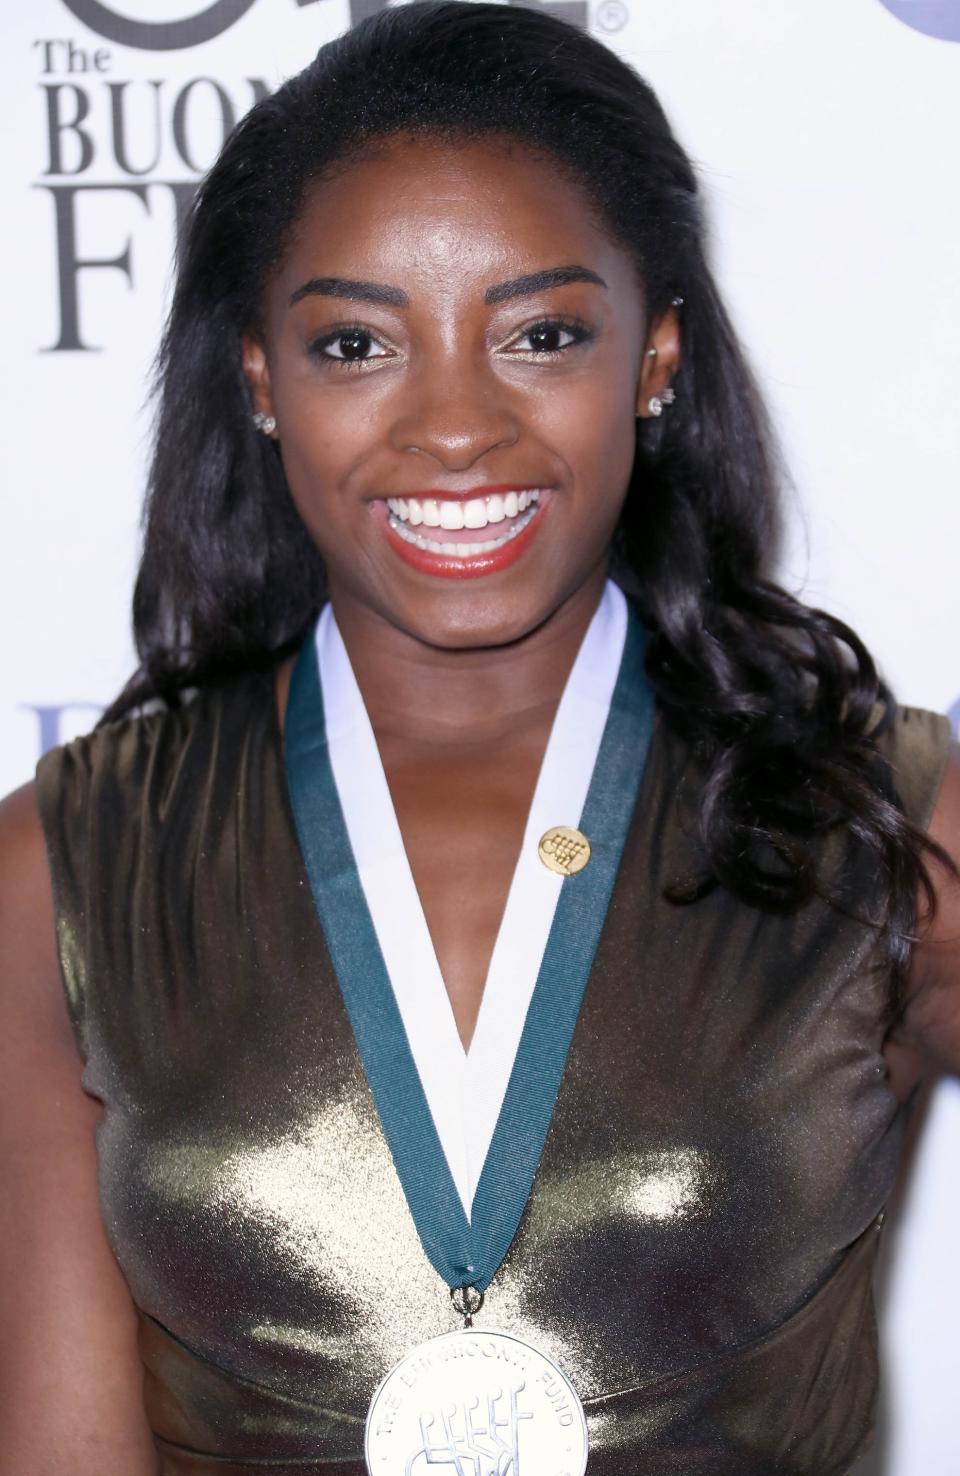 Simone Biles is also among the 180 women to accuse Nassar of sexual abuse. Copyright: [Rex]